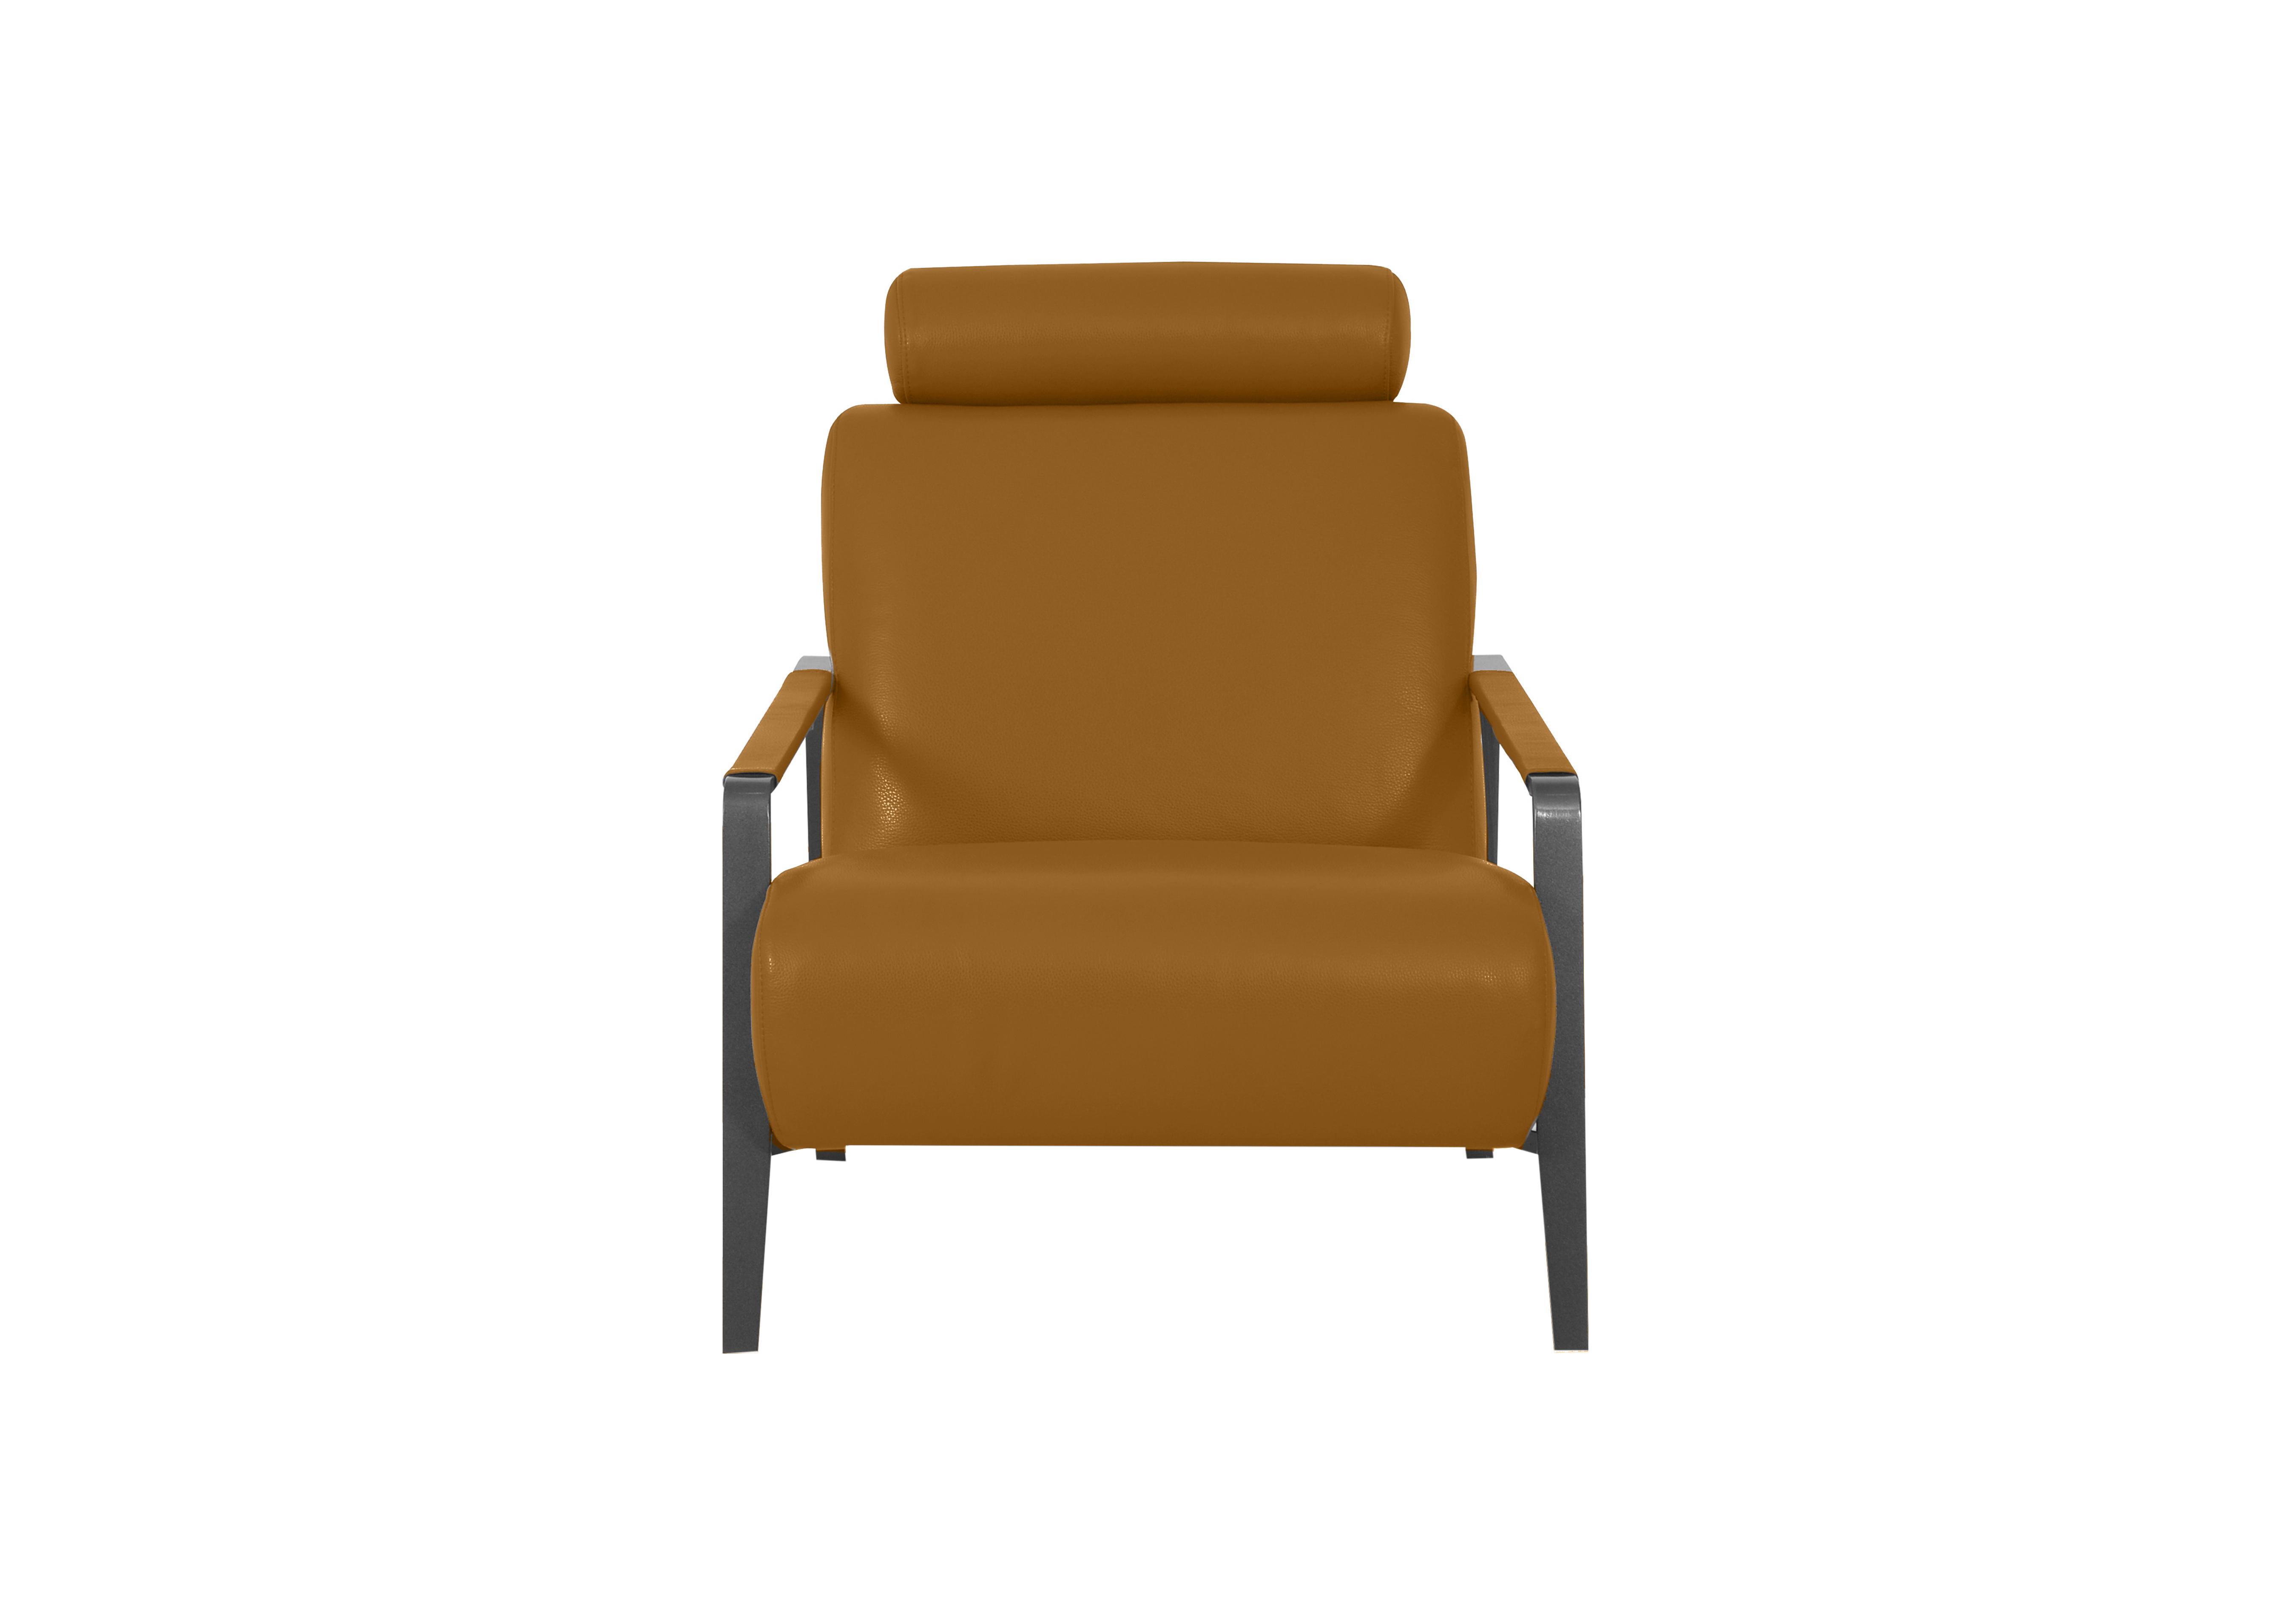 Lawson Leather Accent Chair in Np-606e Honey Yellow on Furniture Village